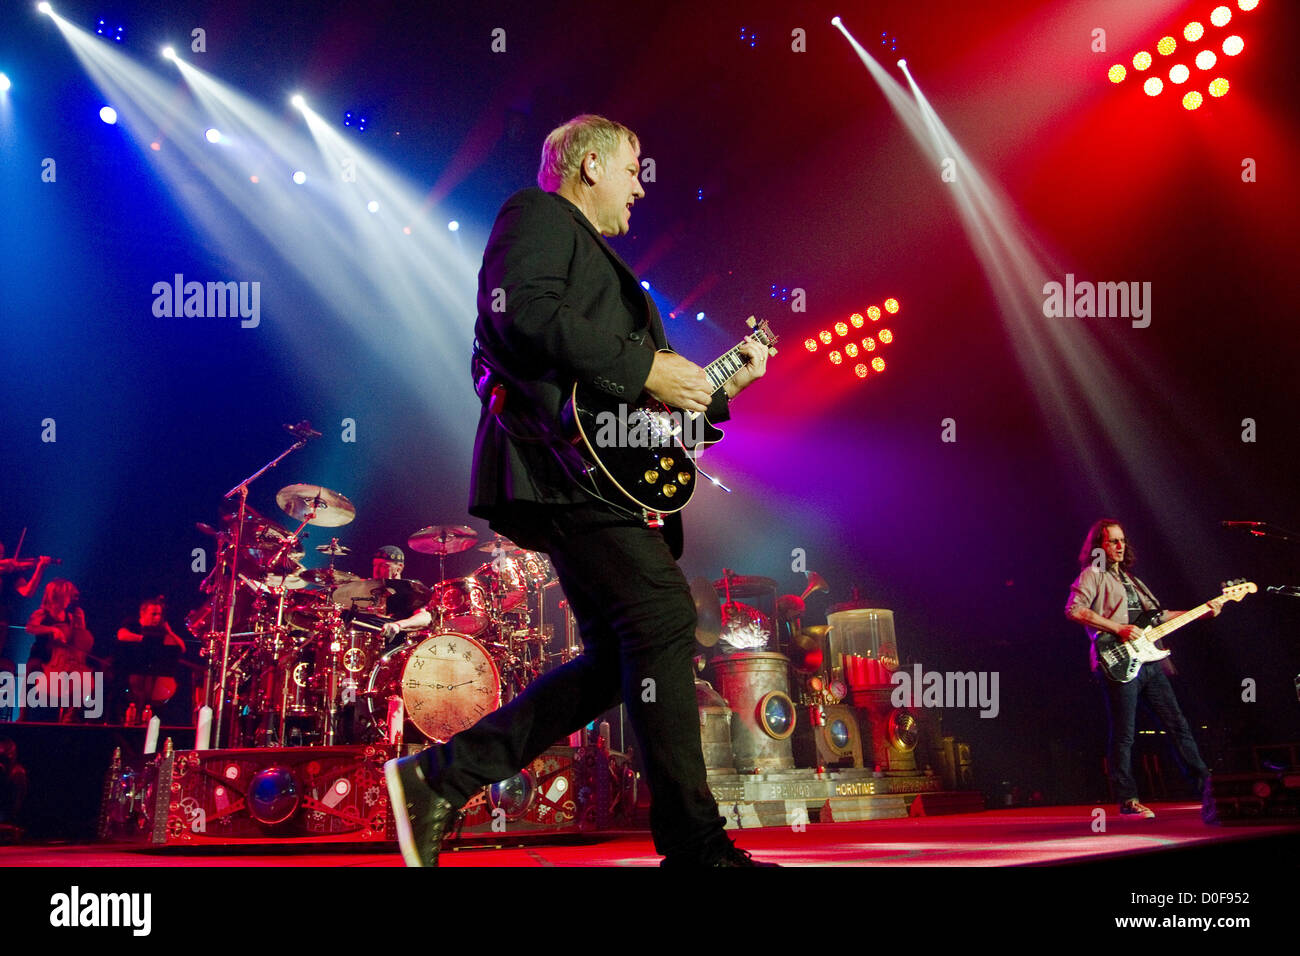 Nov. 21, 2012 - San Diego, CA, US - Prog-Rock legends RUSH performed at Valley View Casino Center in San Diego on November 21, 2012. Pictured: ALEX LIFESON, GEDDY LEE, NEIL PEART. (Credit Image: © Daniel Knighton/ZUMAPRESS.com) Stock Photo